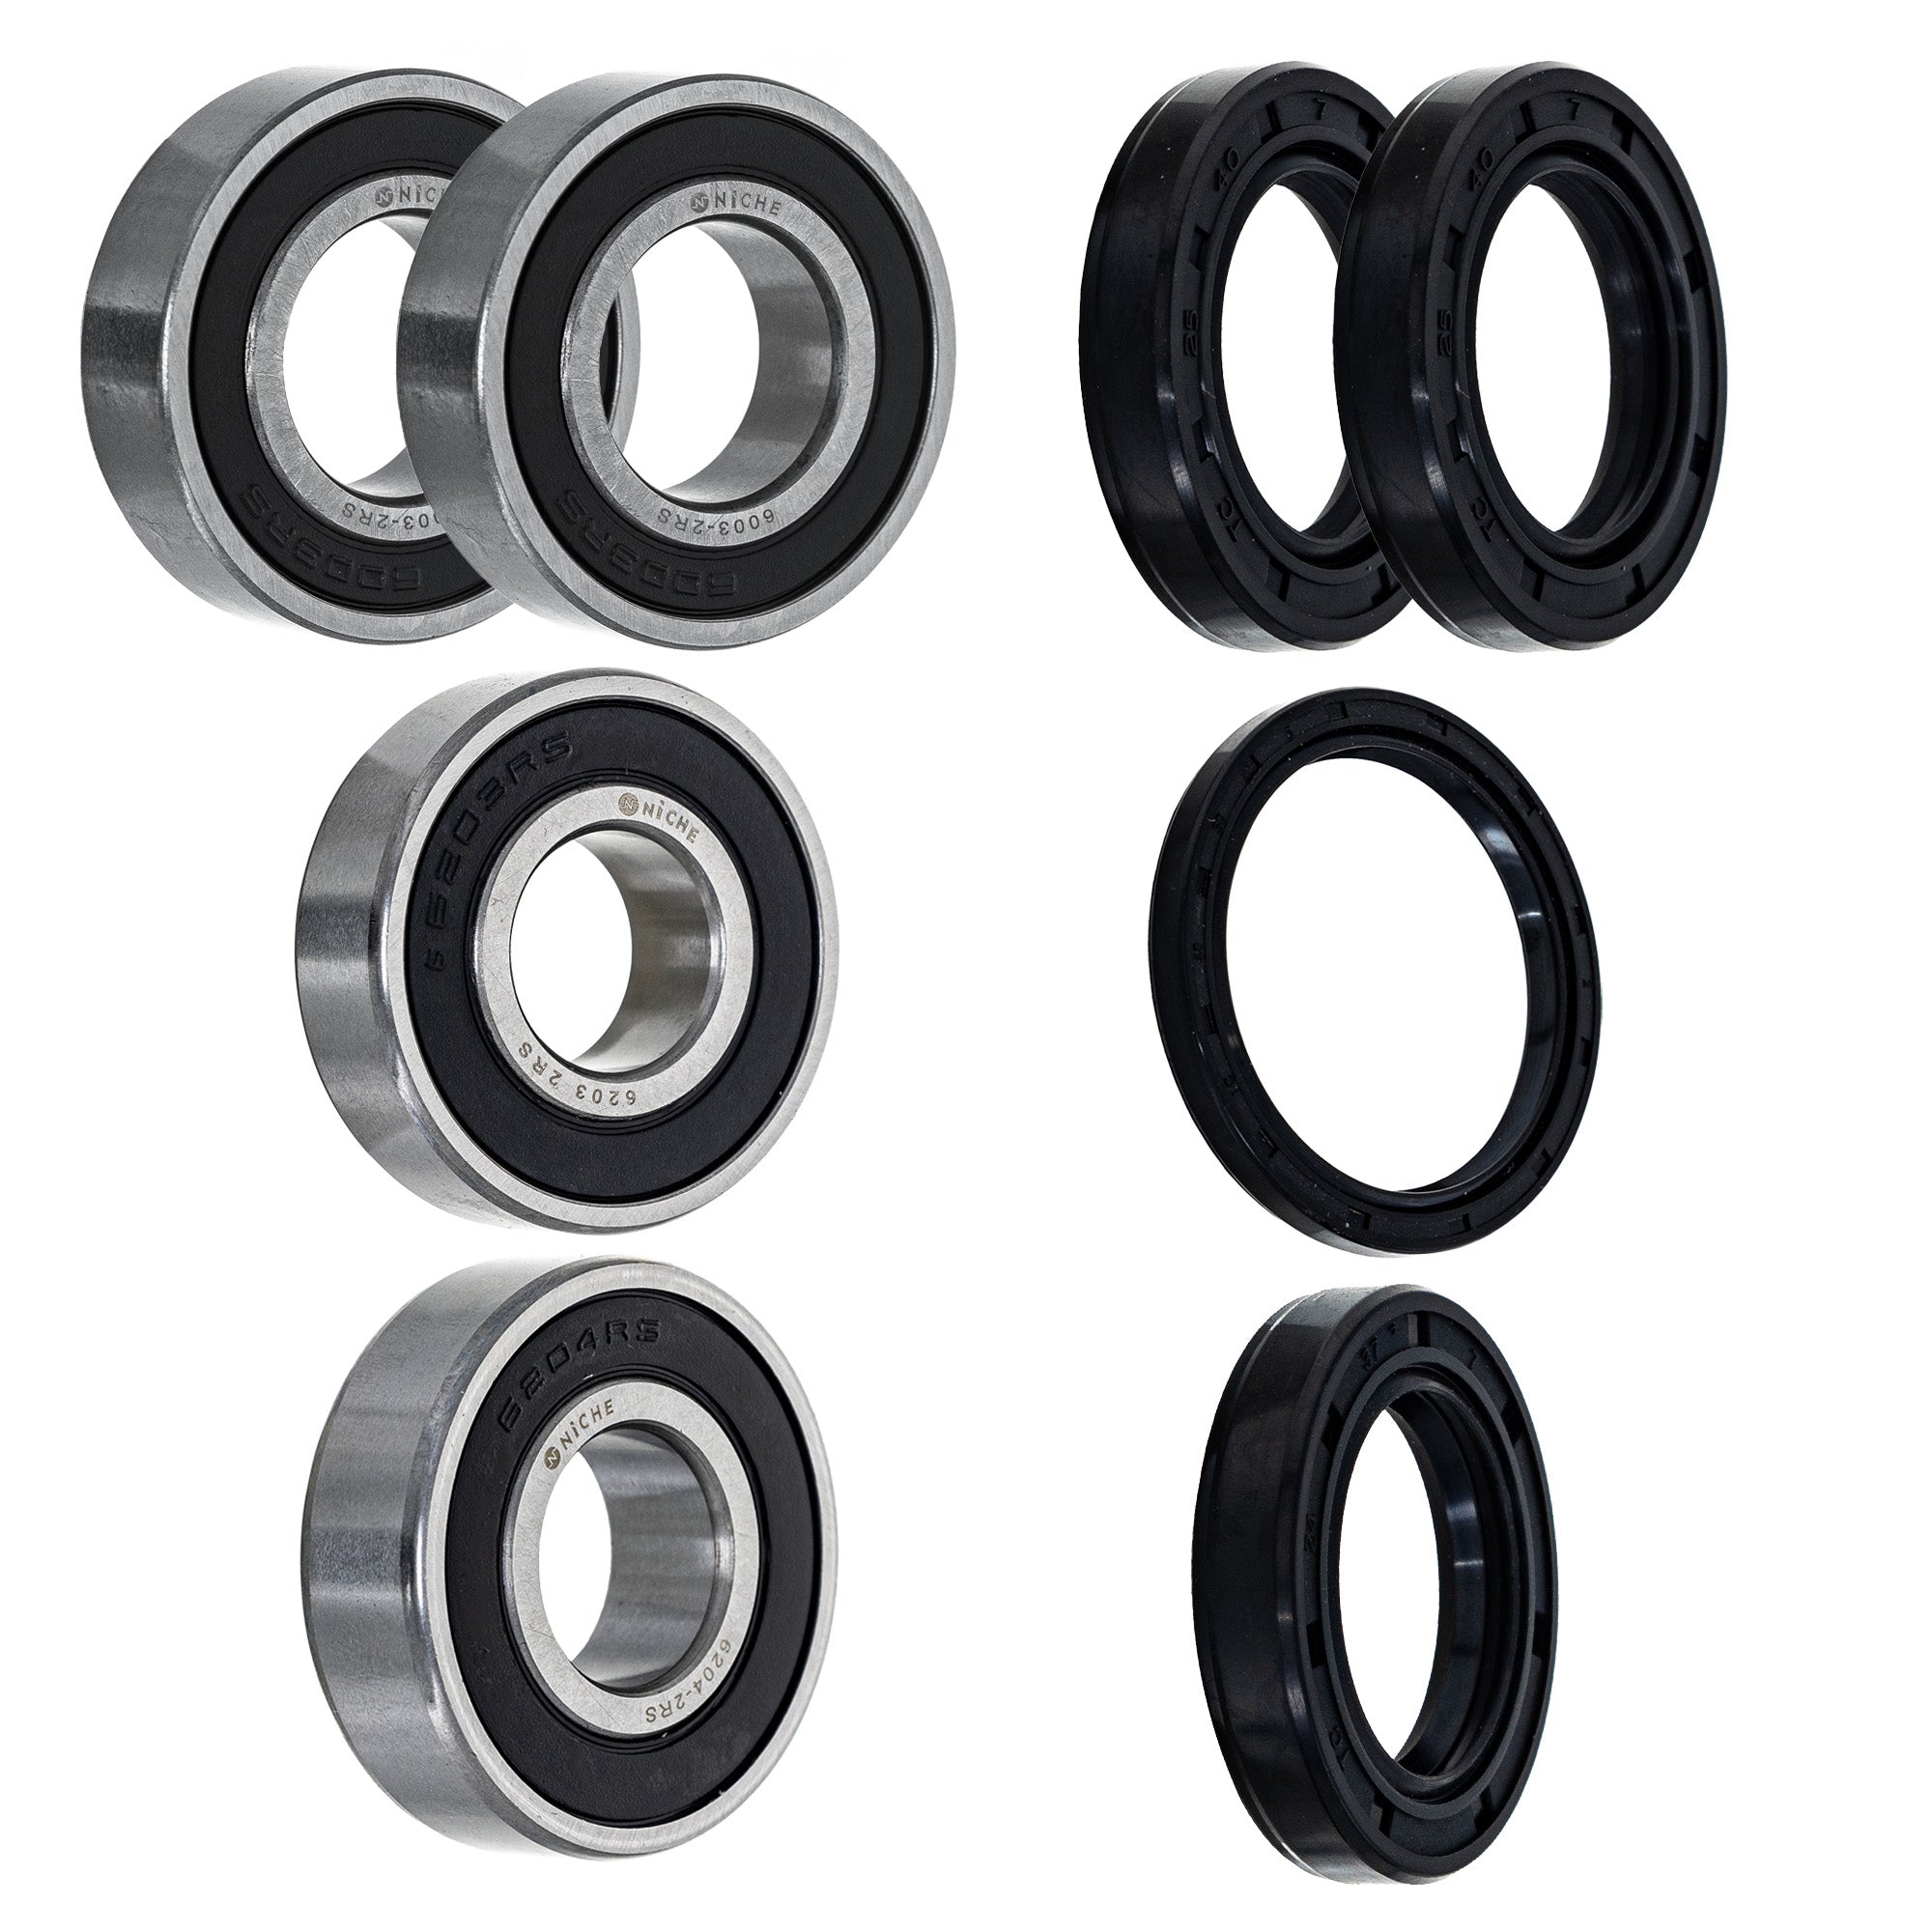 Wheel Bearing Seal Kit for zOTHER Ref No XR600R NICHE MK1008756